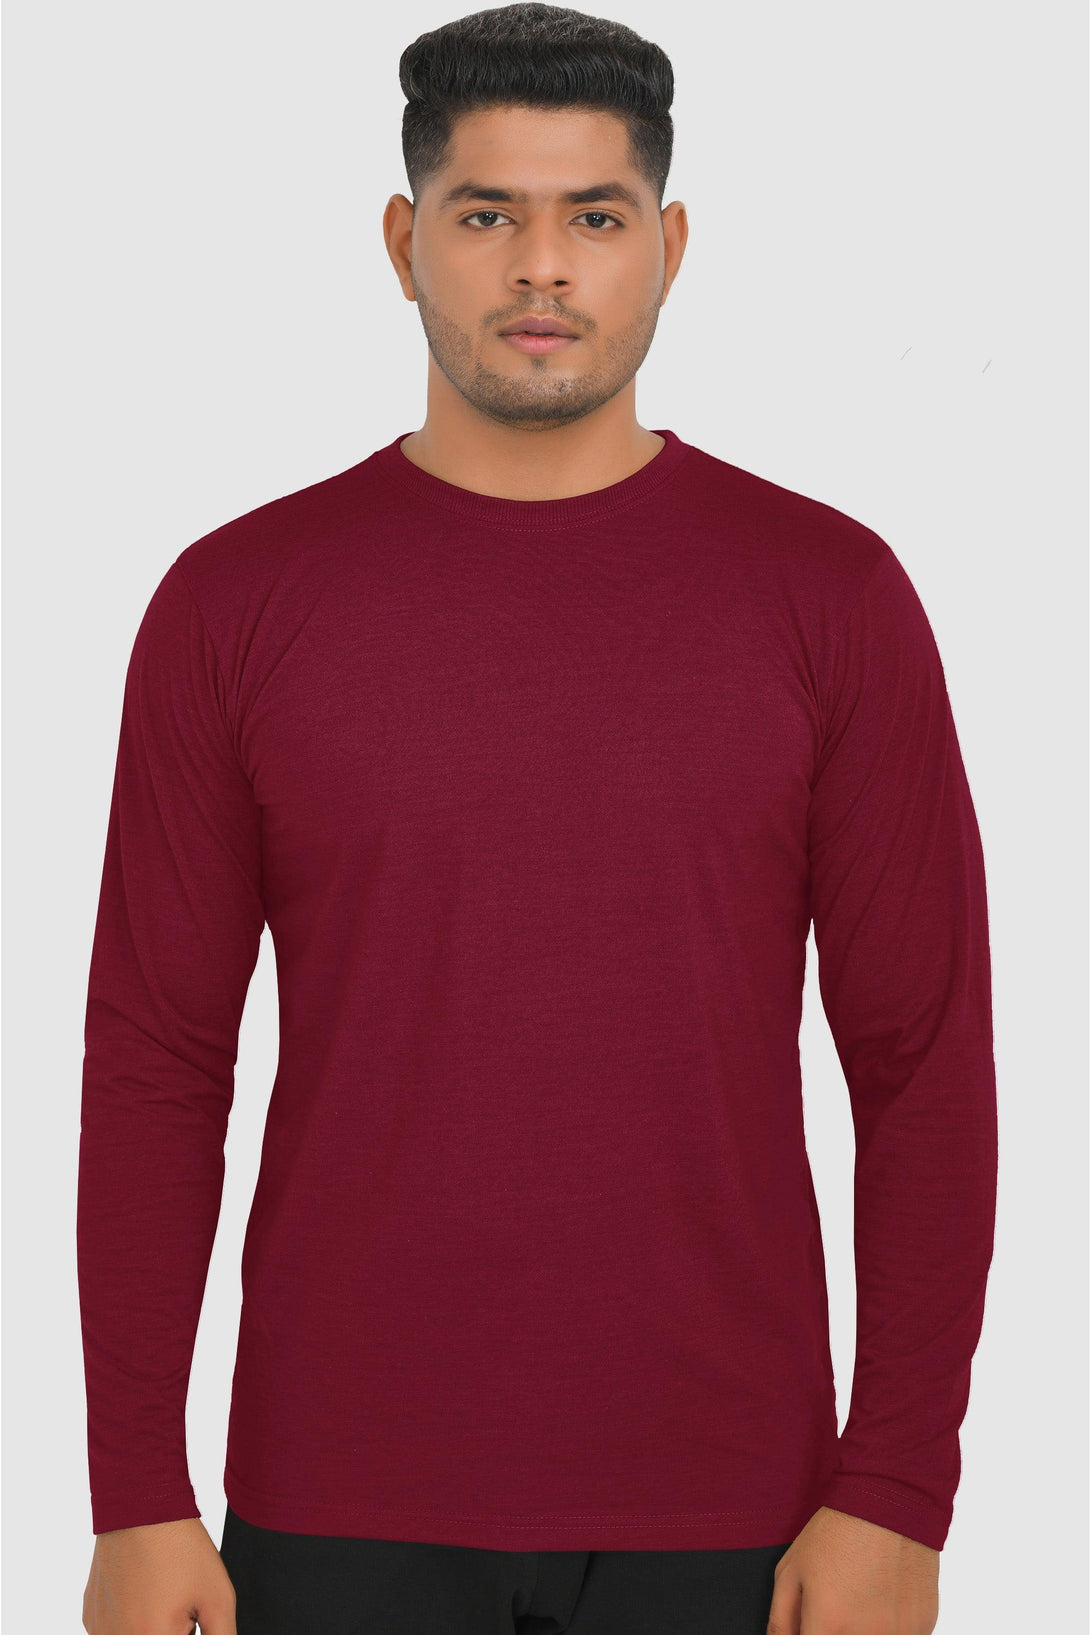 Long Sleeve Round Neck T-Shirts | FOREST GREEN - BLACK - MAROON - NAVY - FTS